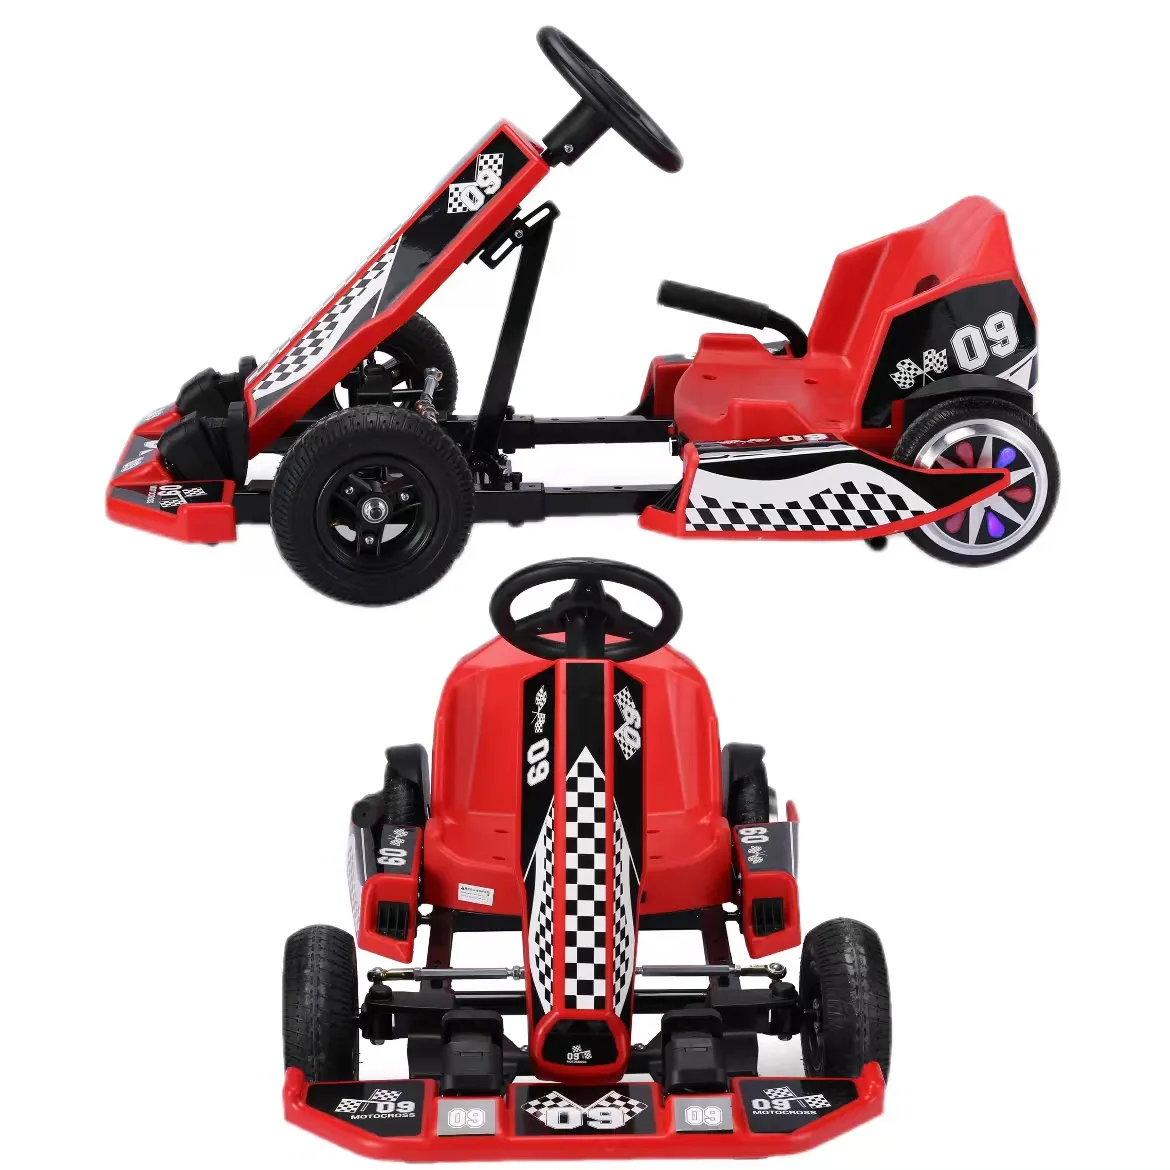 Go Karts ride on toy style kids electric car adult drift karts remote control kids drive buggy mini kids go karting